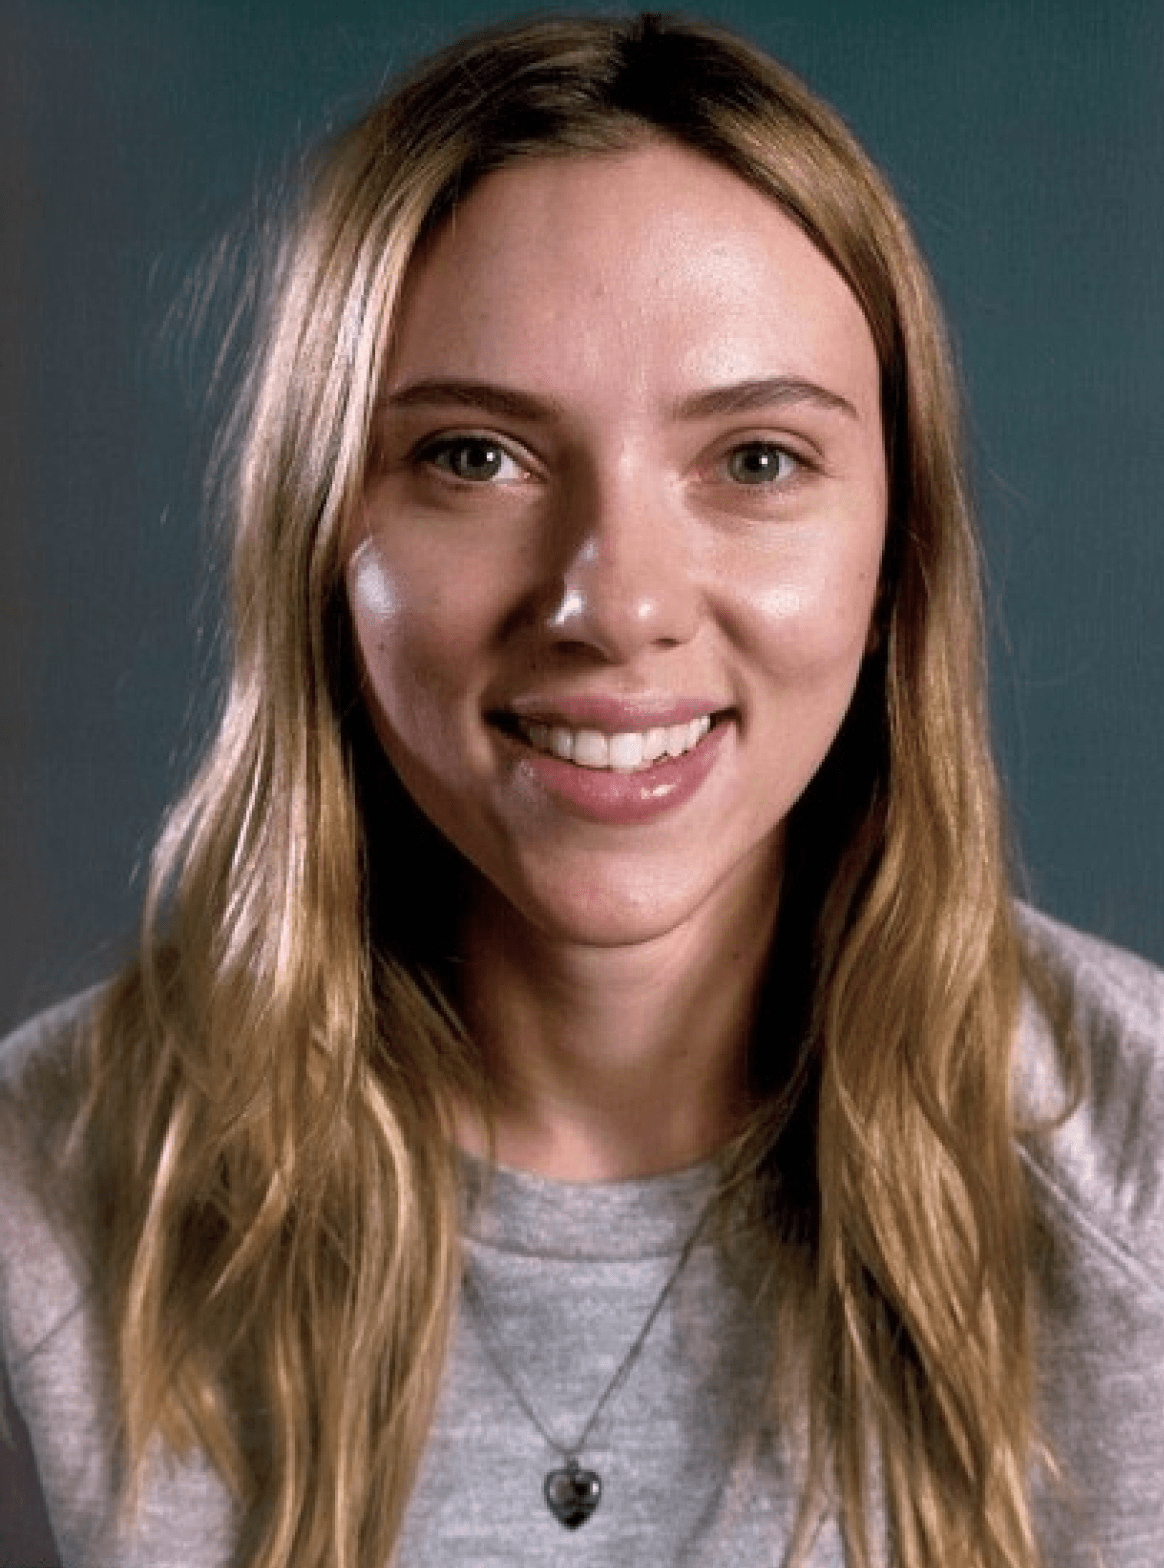 I think Scarlett Johansson without makeup is still fucking hot